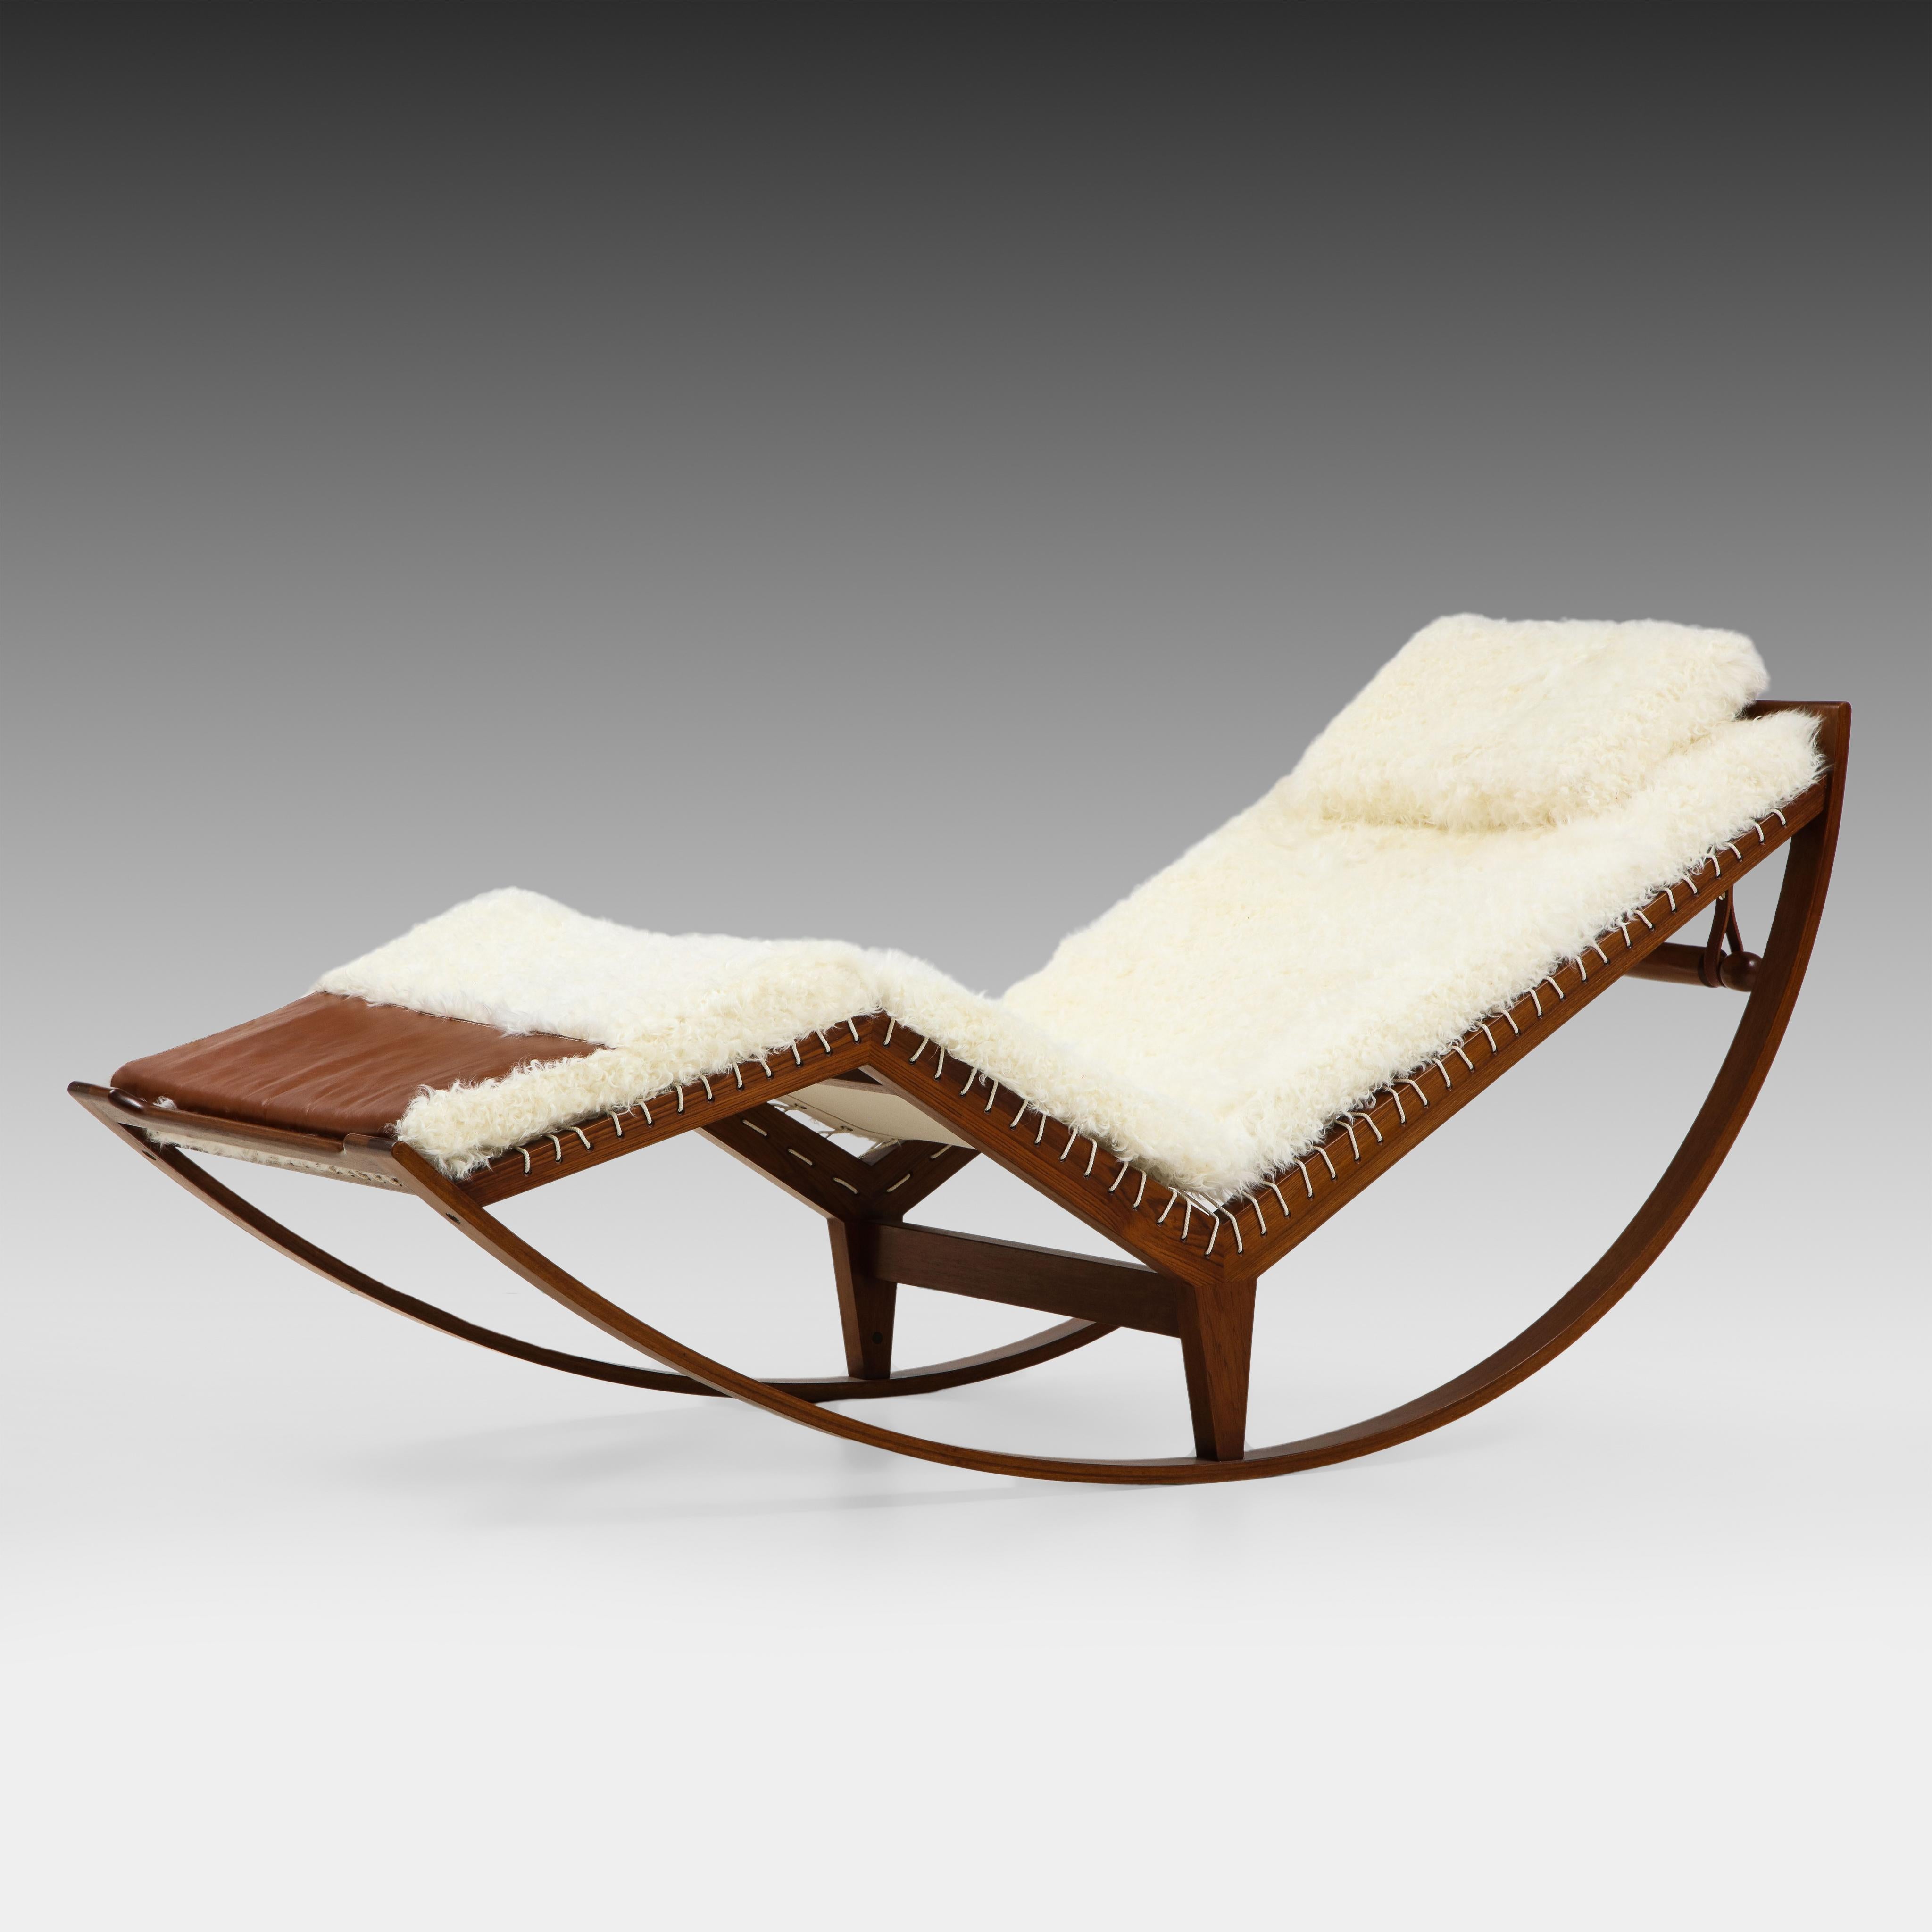 Franco Albini for Poggi rocking chair model PS16 with walnut frame and newly upholstered luxurious white Kalgan lambskin cushions with saddle leather details on canvas seating tied with rope.  This iconic chair was designed in 1956 by Franco Albini